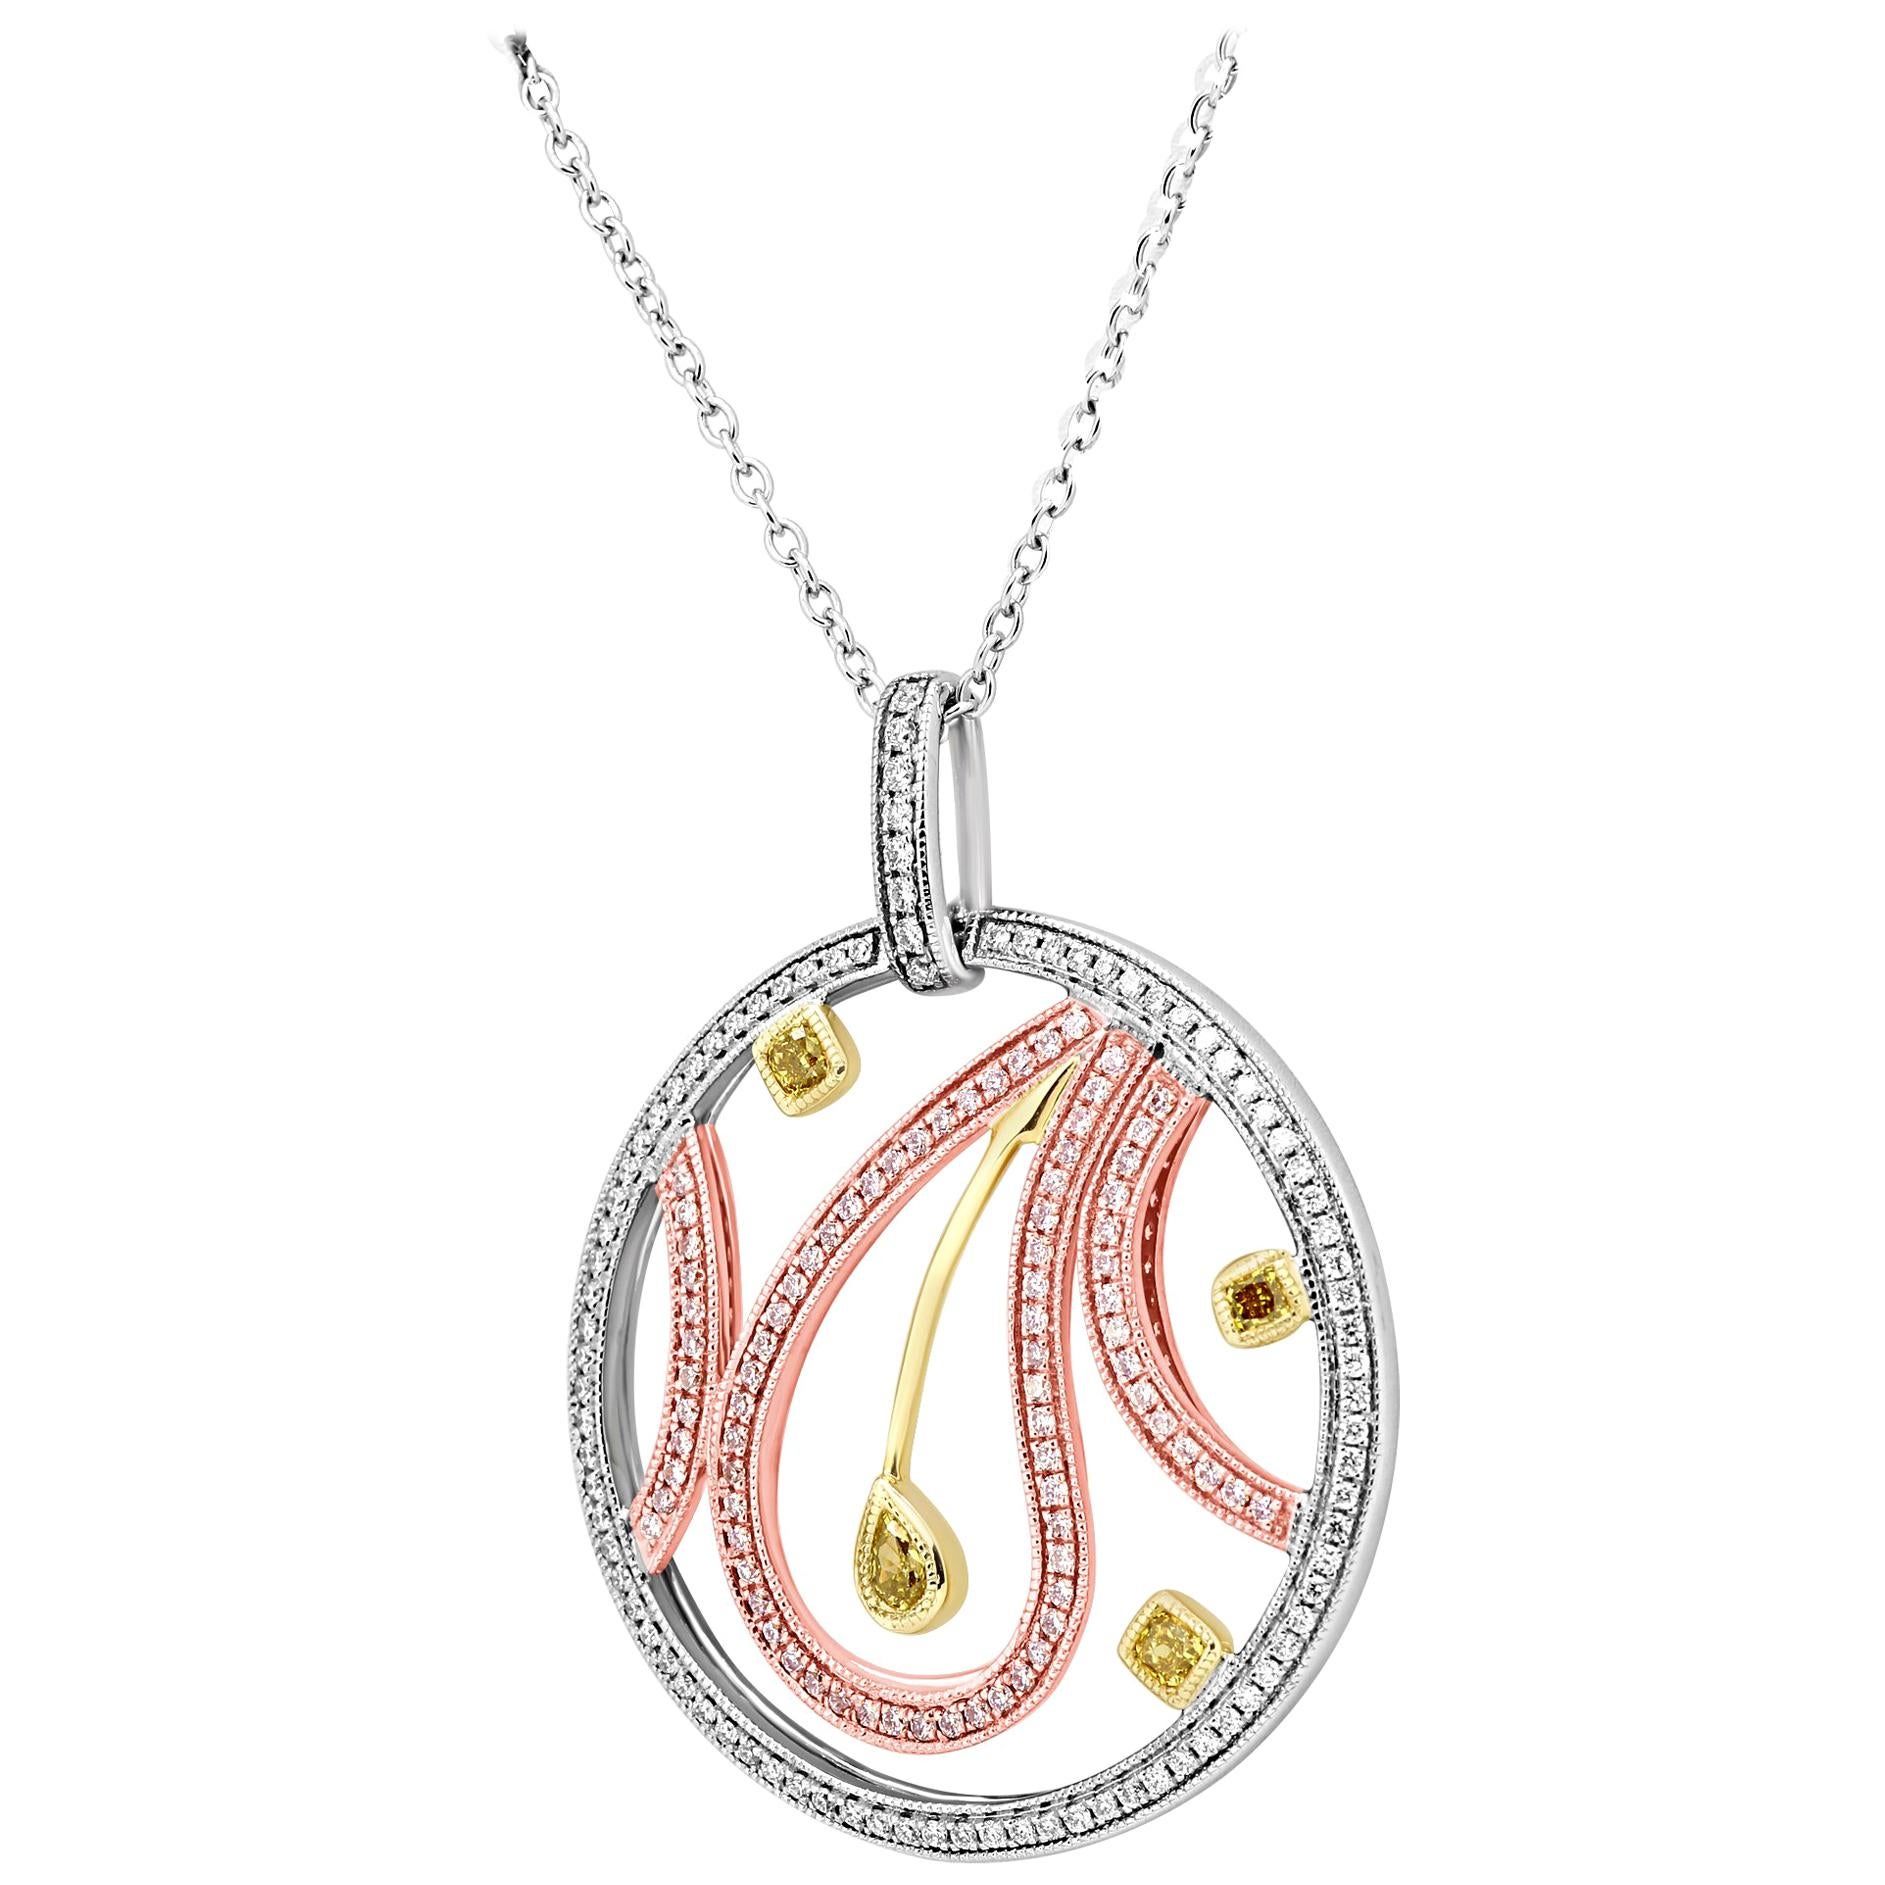 Natural Fancy Color and Pink Diamond Three Color Gold Medallion Chain Pendant